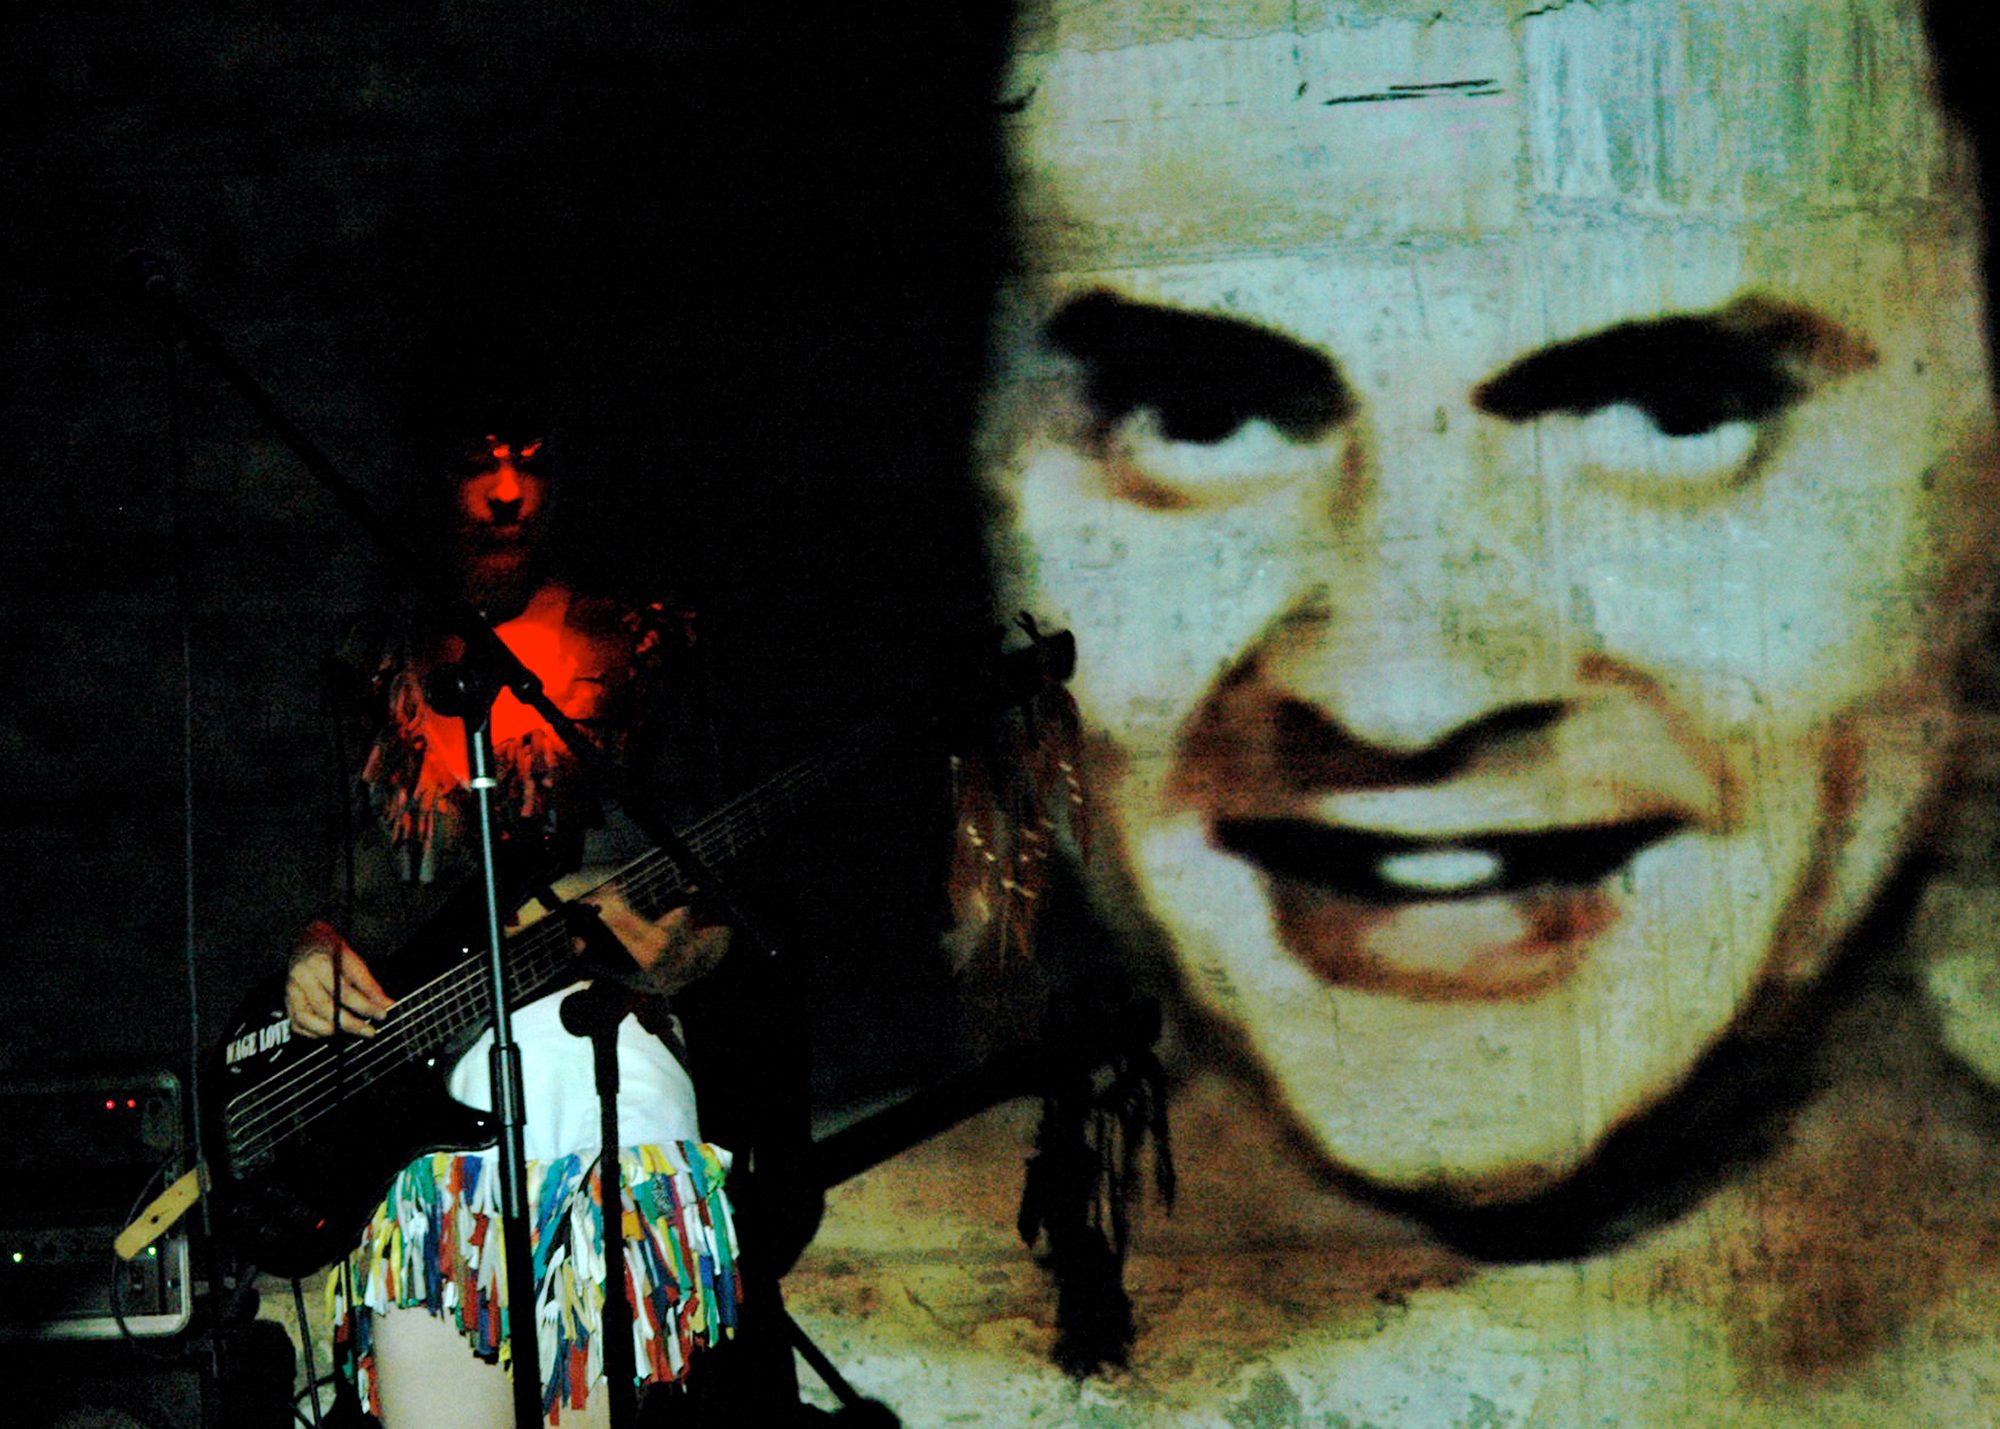 Caeser's face projected behind bassist